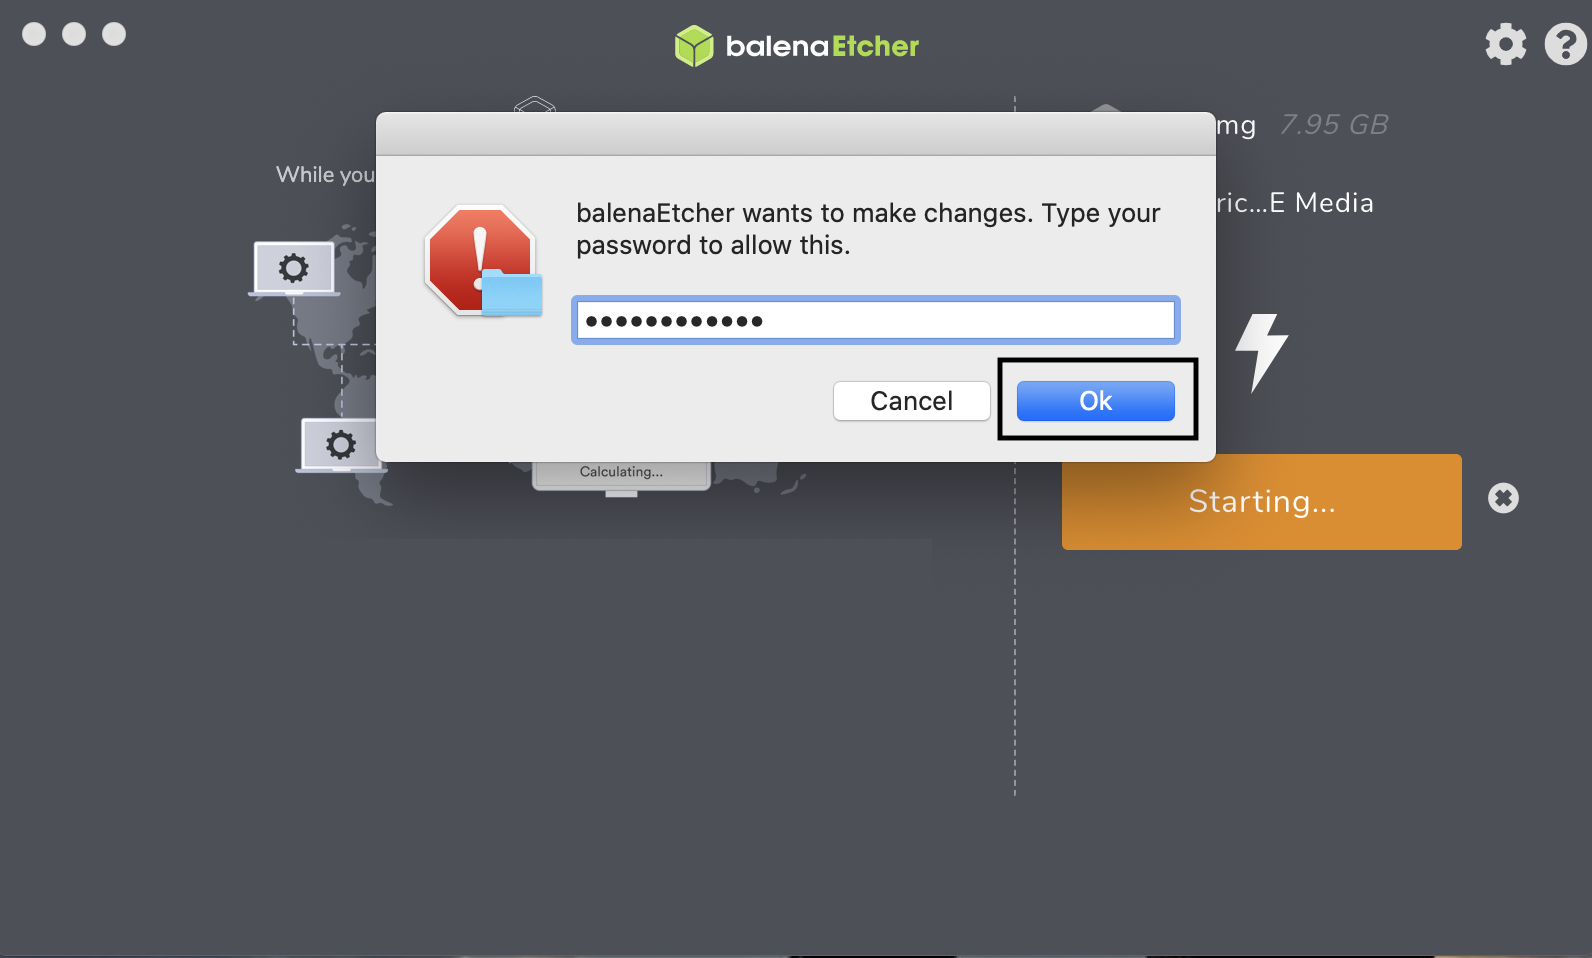 This image shows an example of a password prompt in BalenaEtcher.